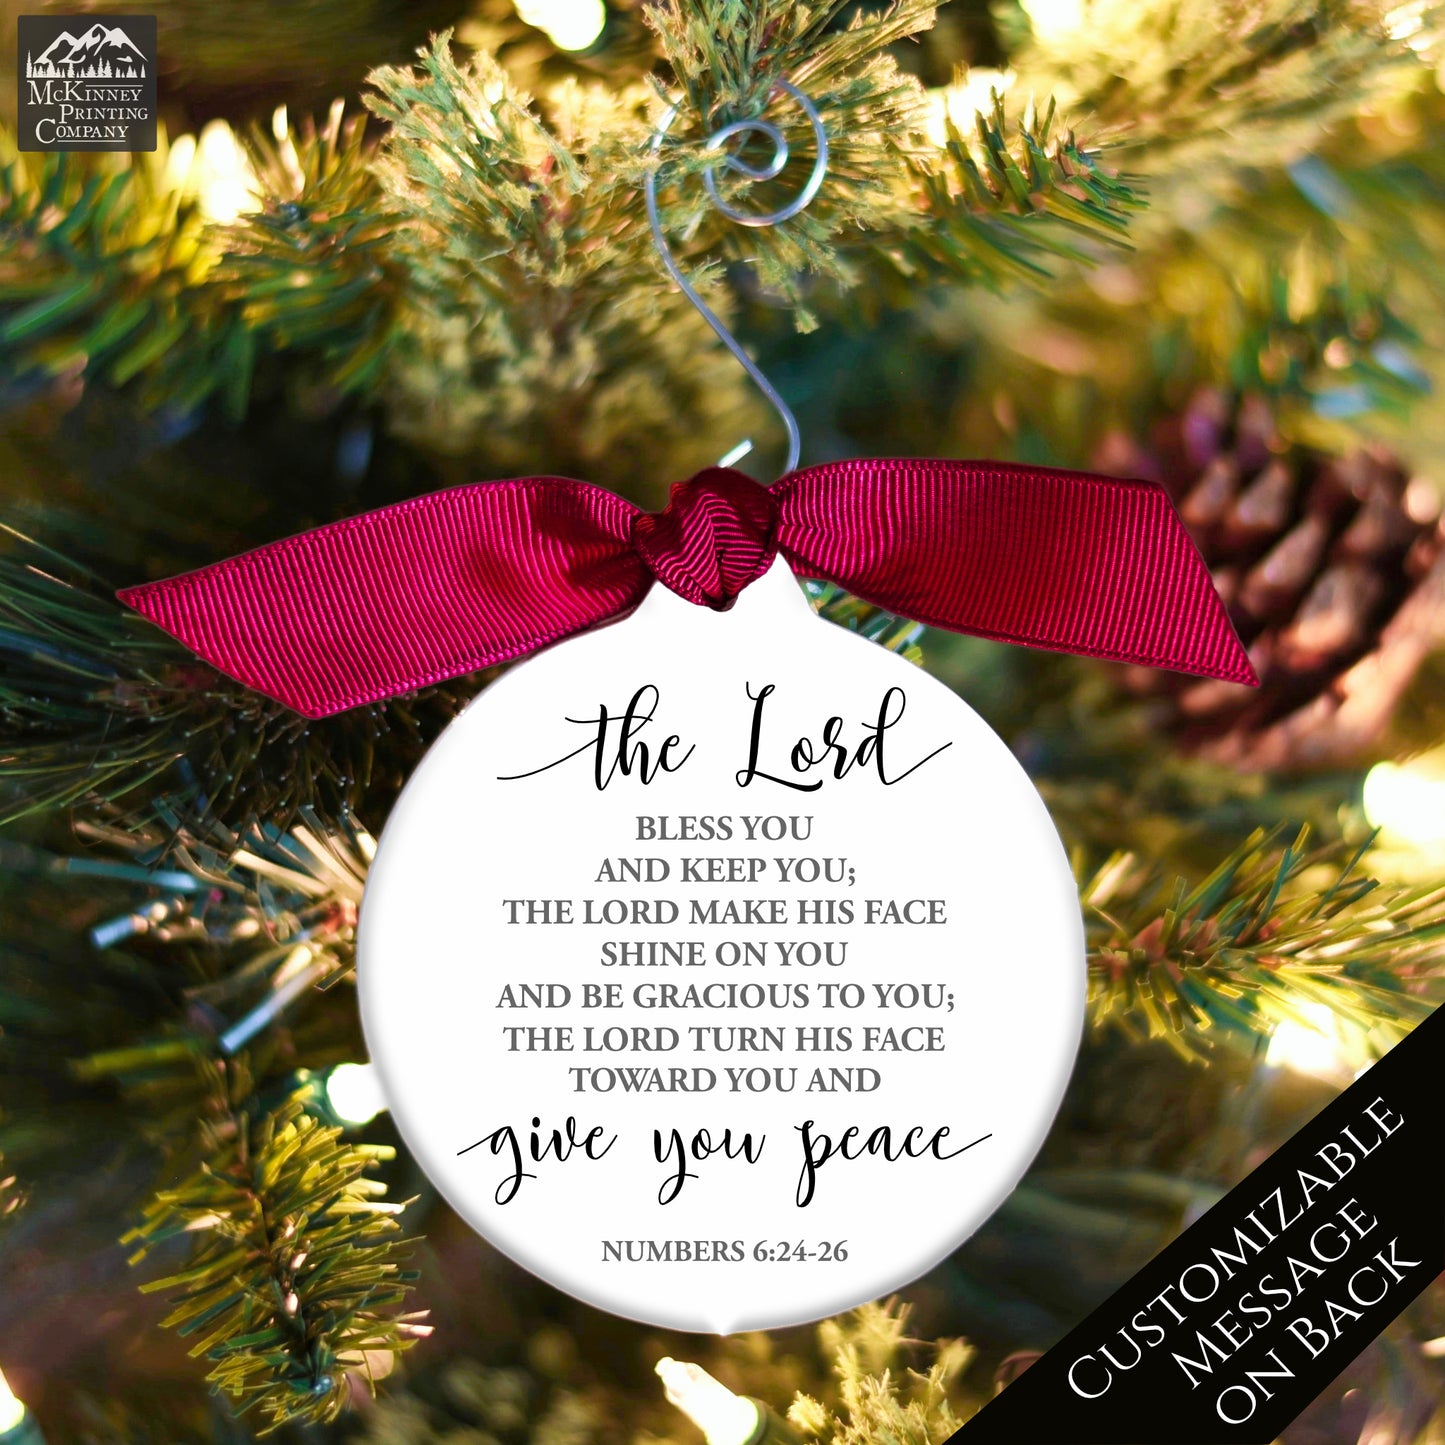 May the Lord Bless You and Keep You - Christmas Ornament, Numbers 6:24